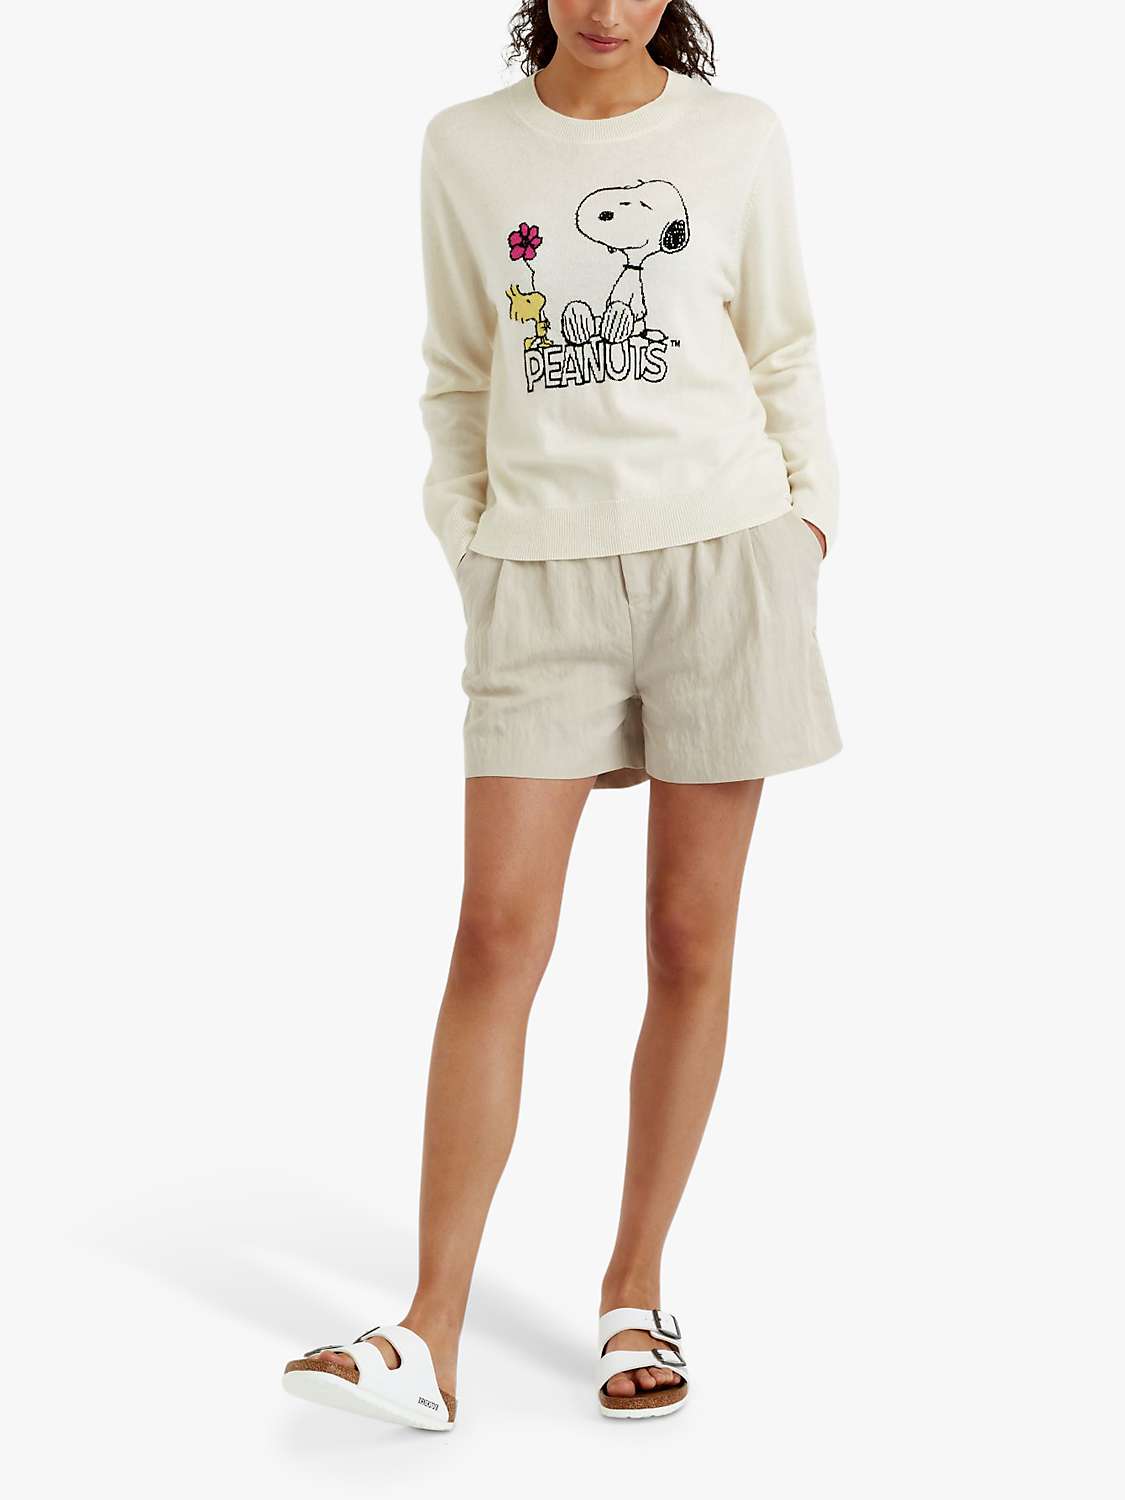 Buy Chinti & Parker Peanuts Wool Cashmere Blend Jumper Online at johnlewis.com